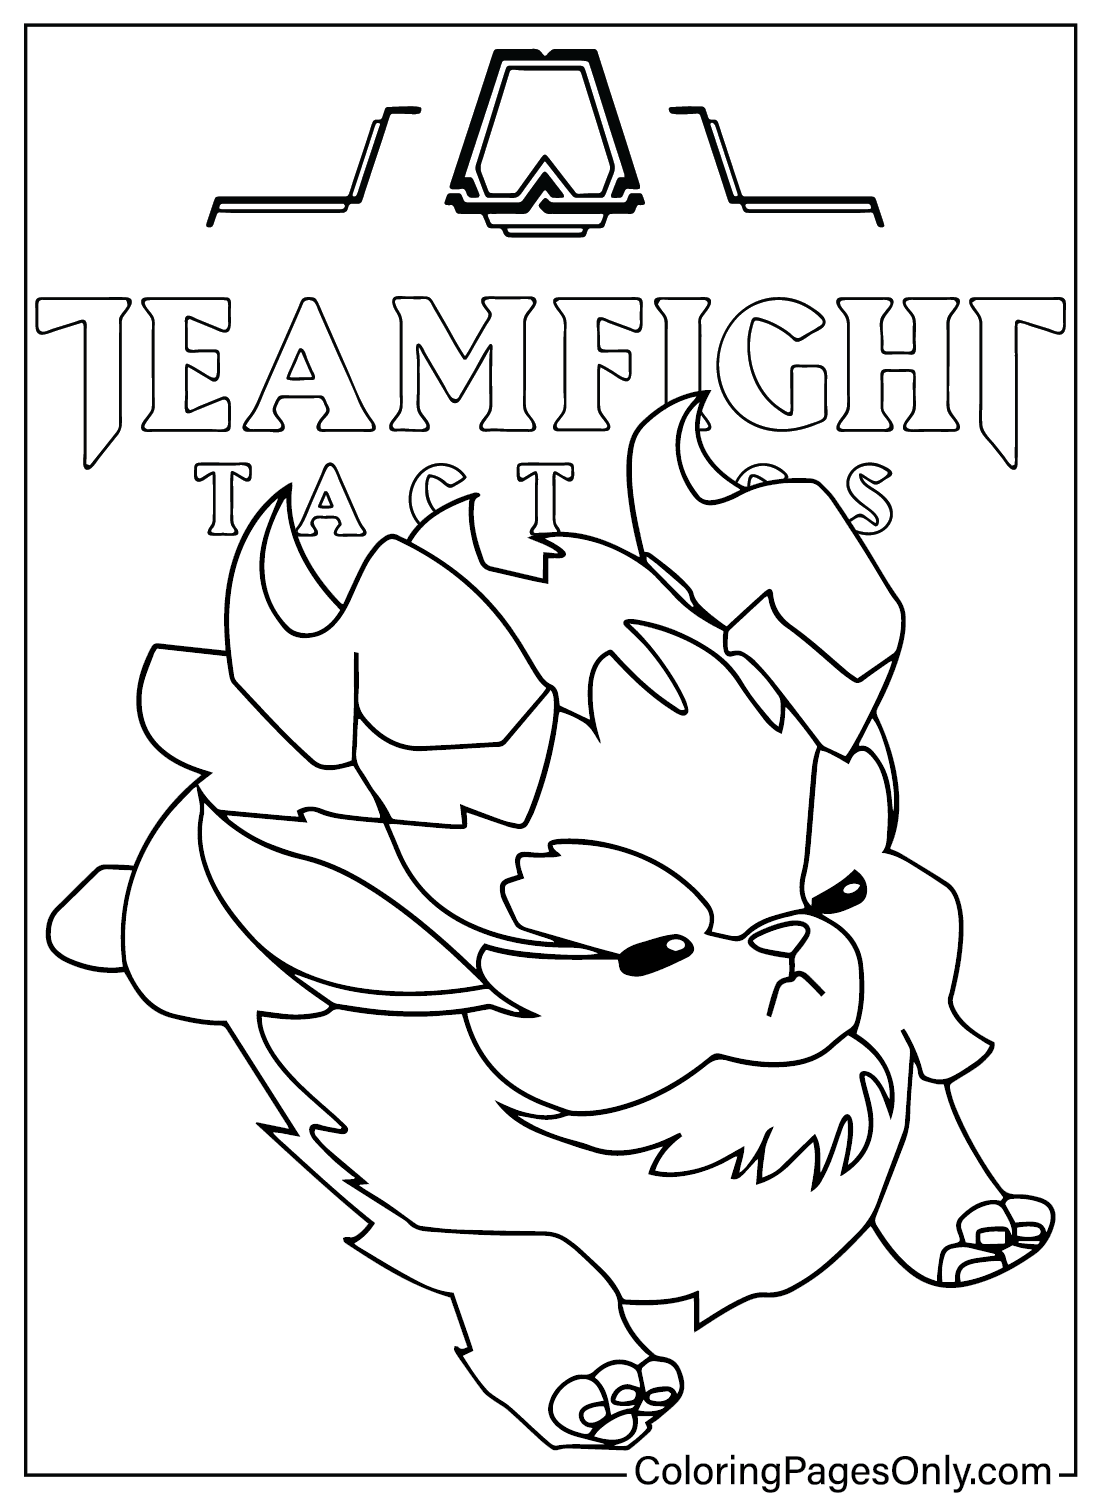 Furyhorn Teamfight Tactics Coloring Page from Teamfight Tactics